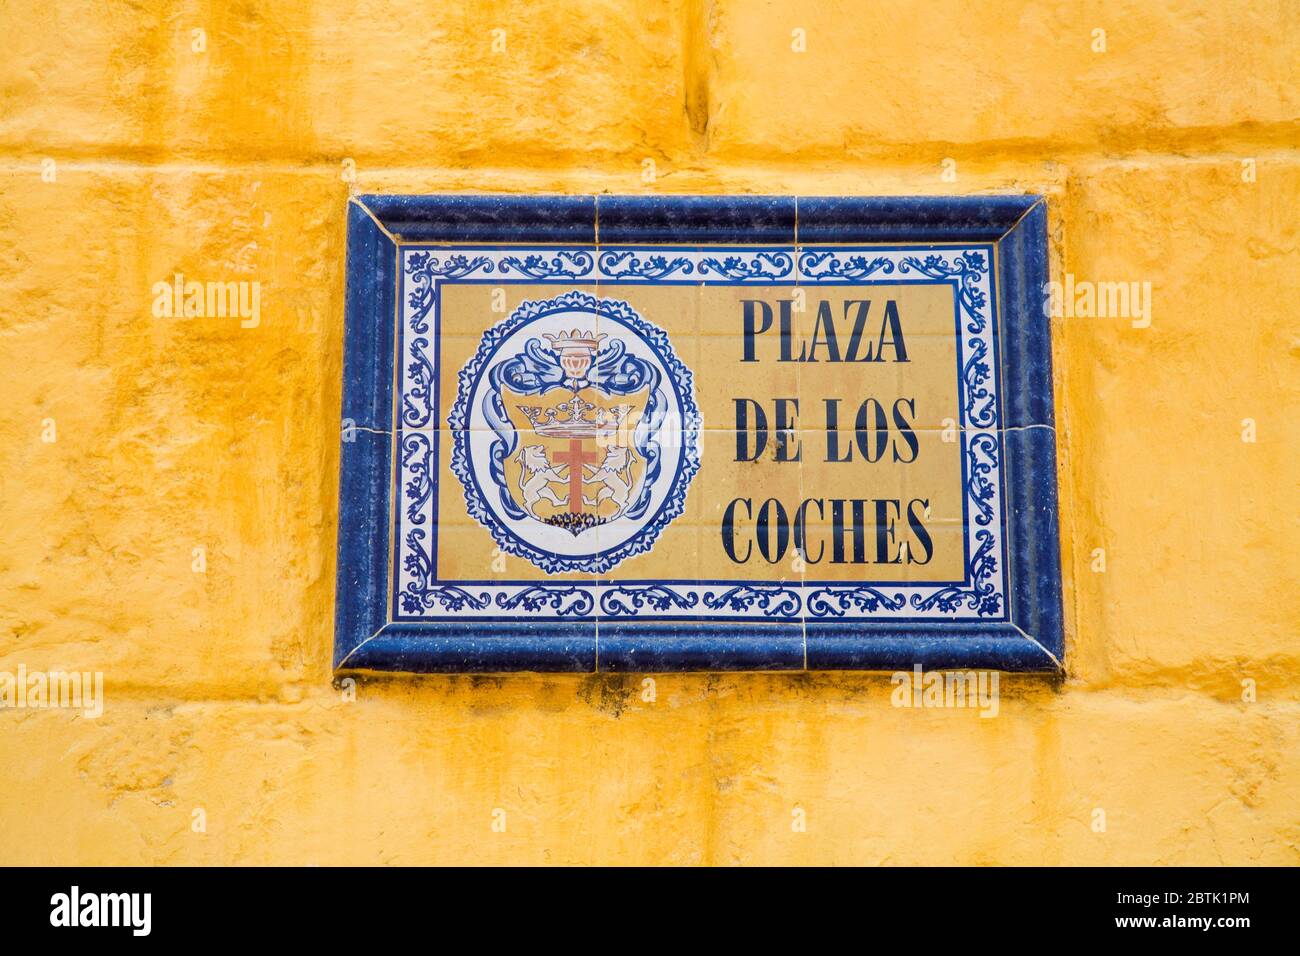 Plaza De Los Coches Sign, Old Walled City District, Cartagena City, Bolivar State, Colombia, Central America Stock Photo